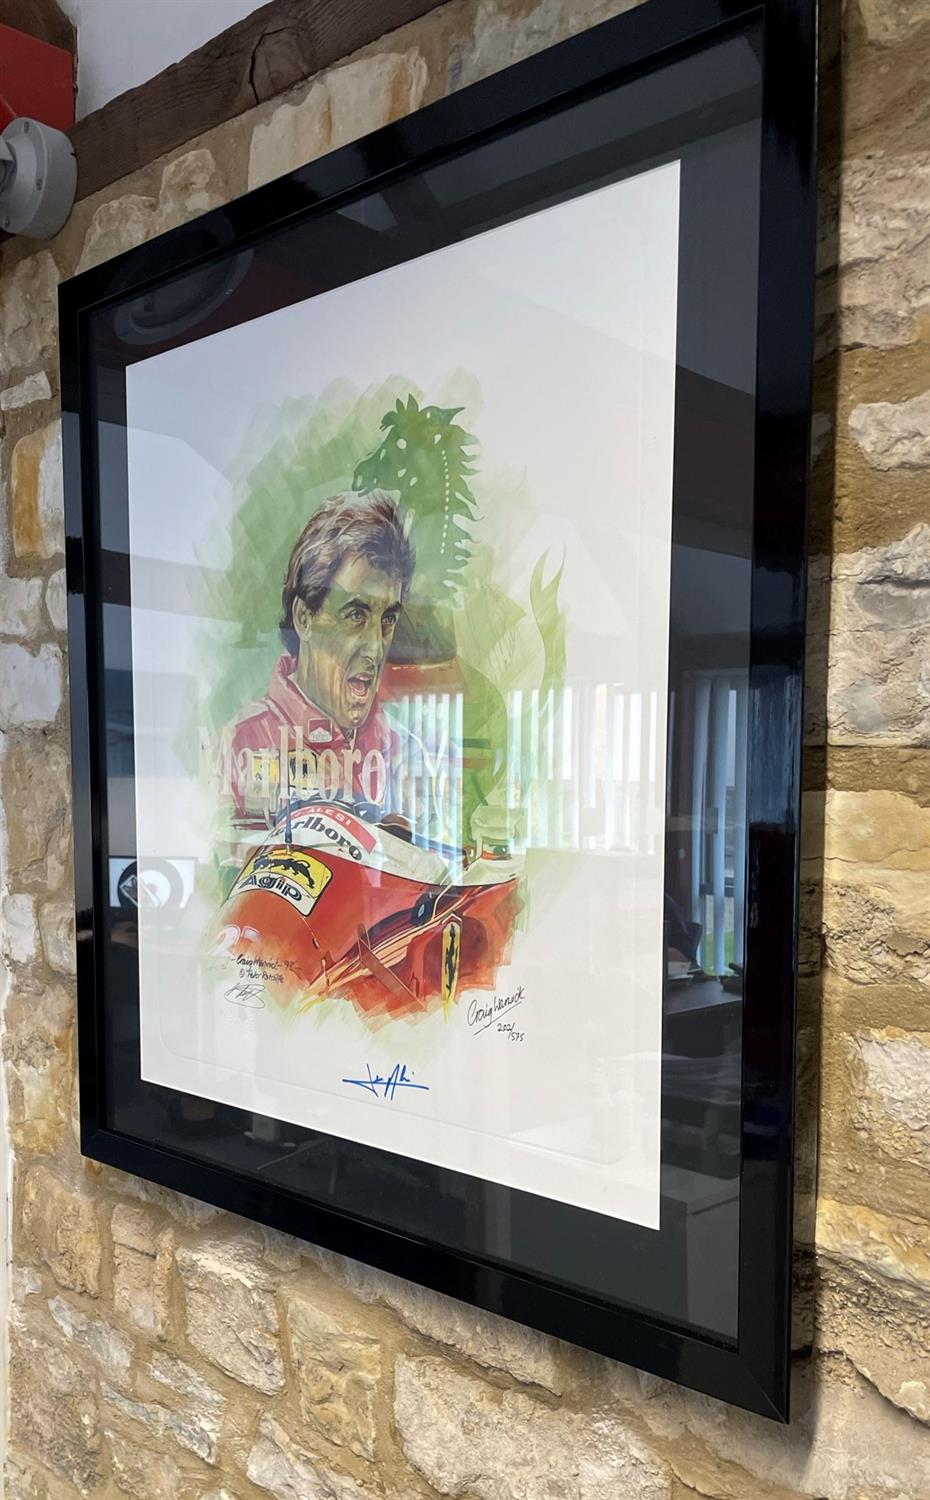 Jean Alesi Framed and Signed Collage Print by Craig Warwick - Image 2 of 6